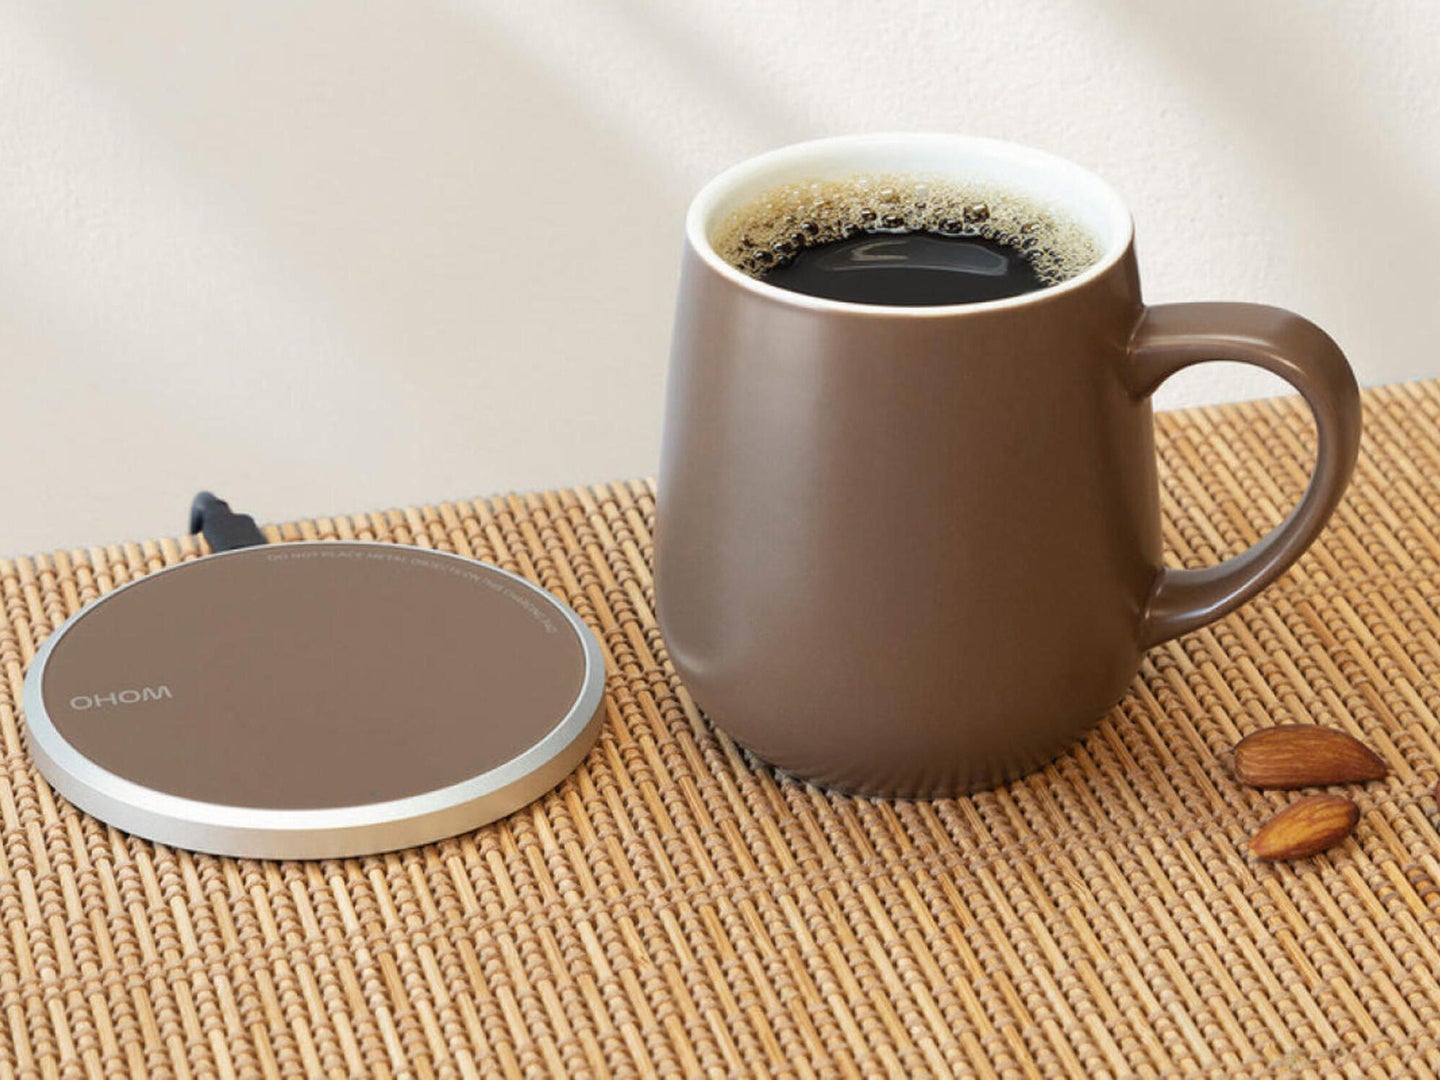 A mug warmer and phone charger on a wooden table